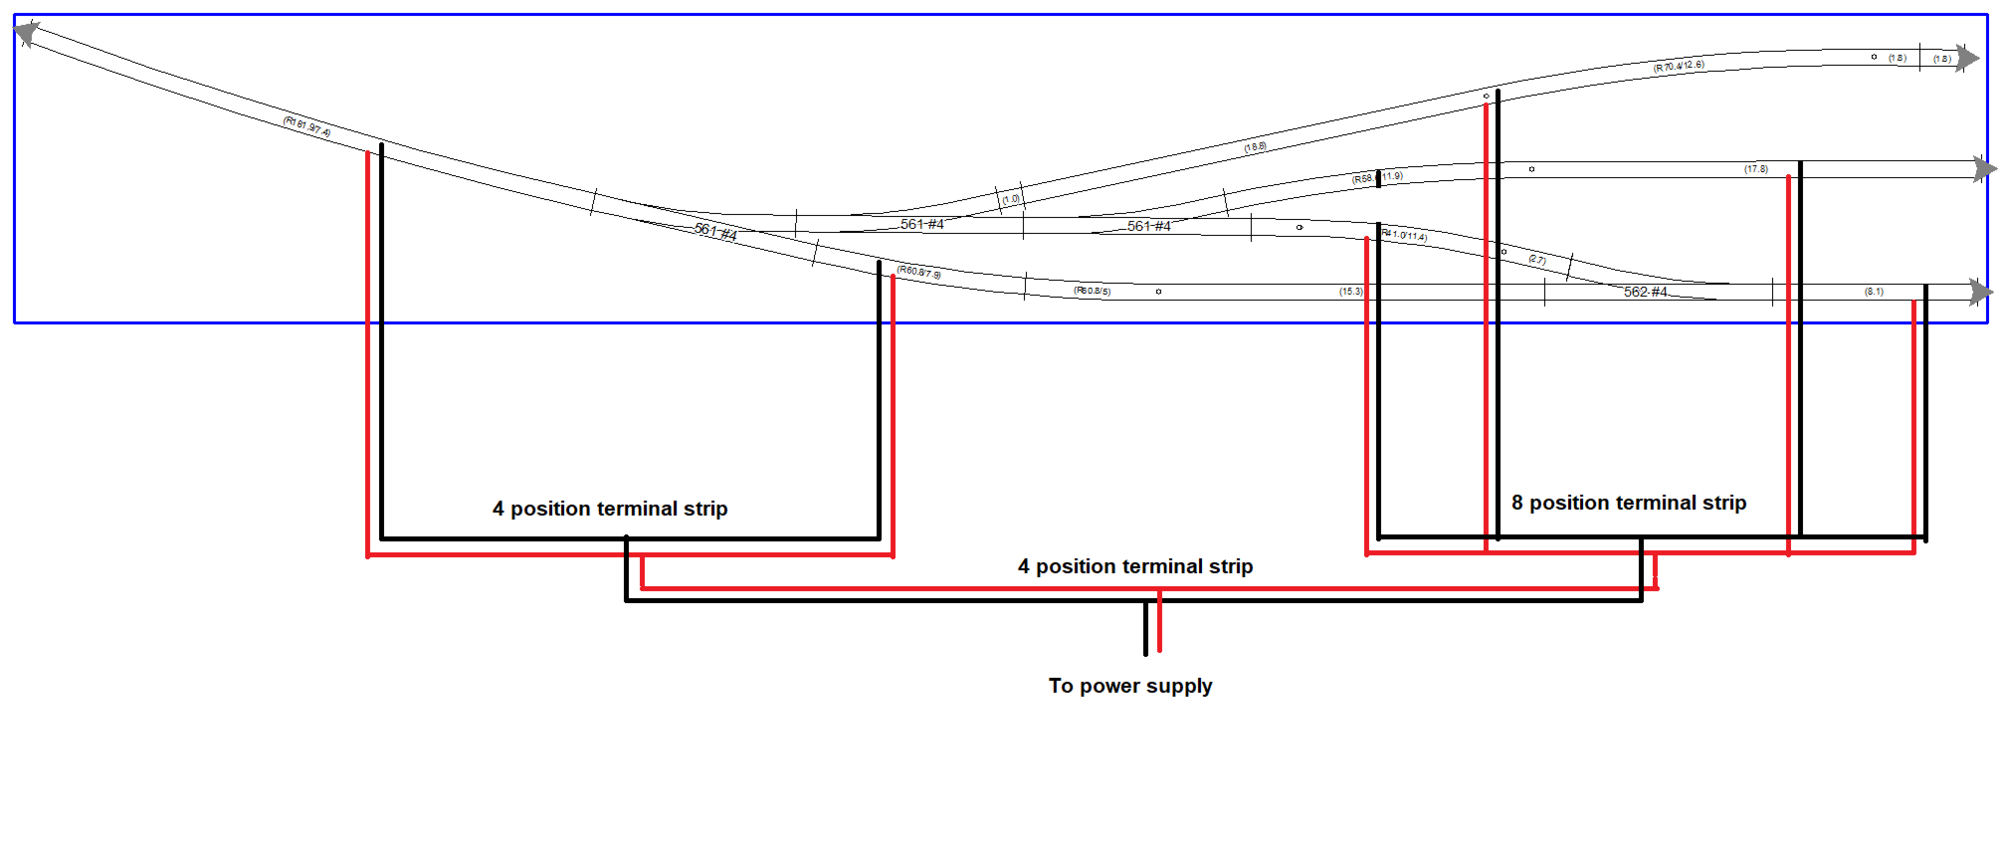 1 x 6.5 ho scale exhibition layout wiring diagram.png